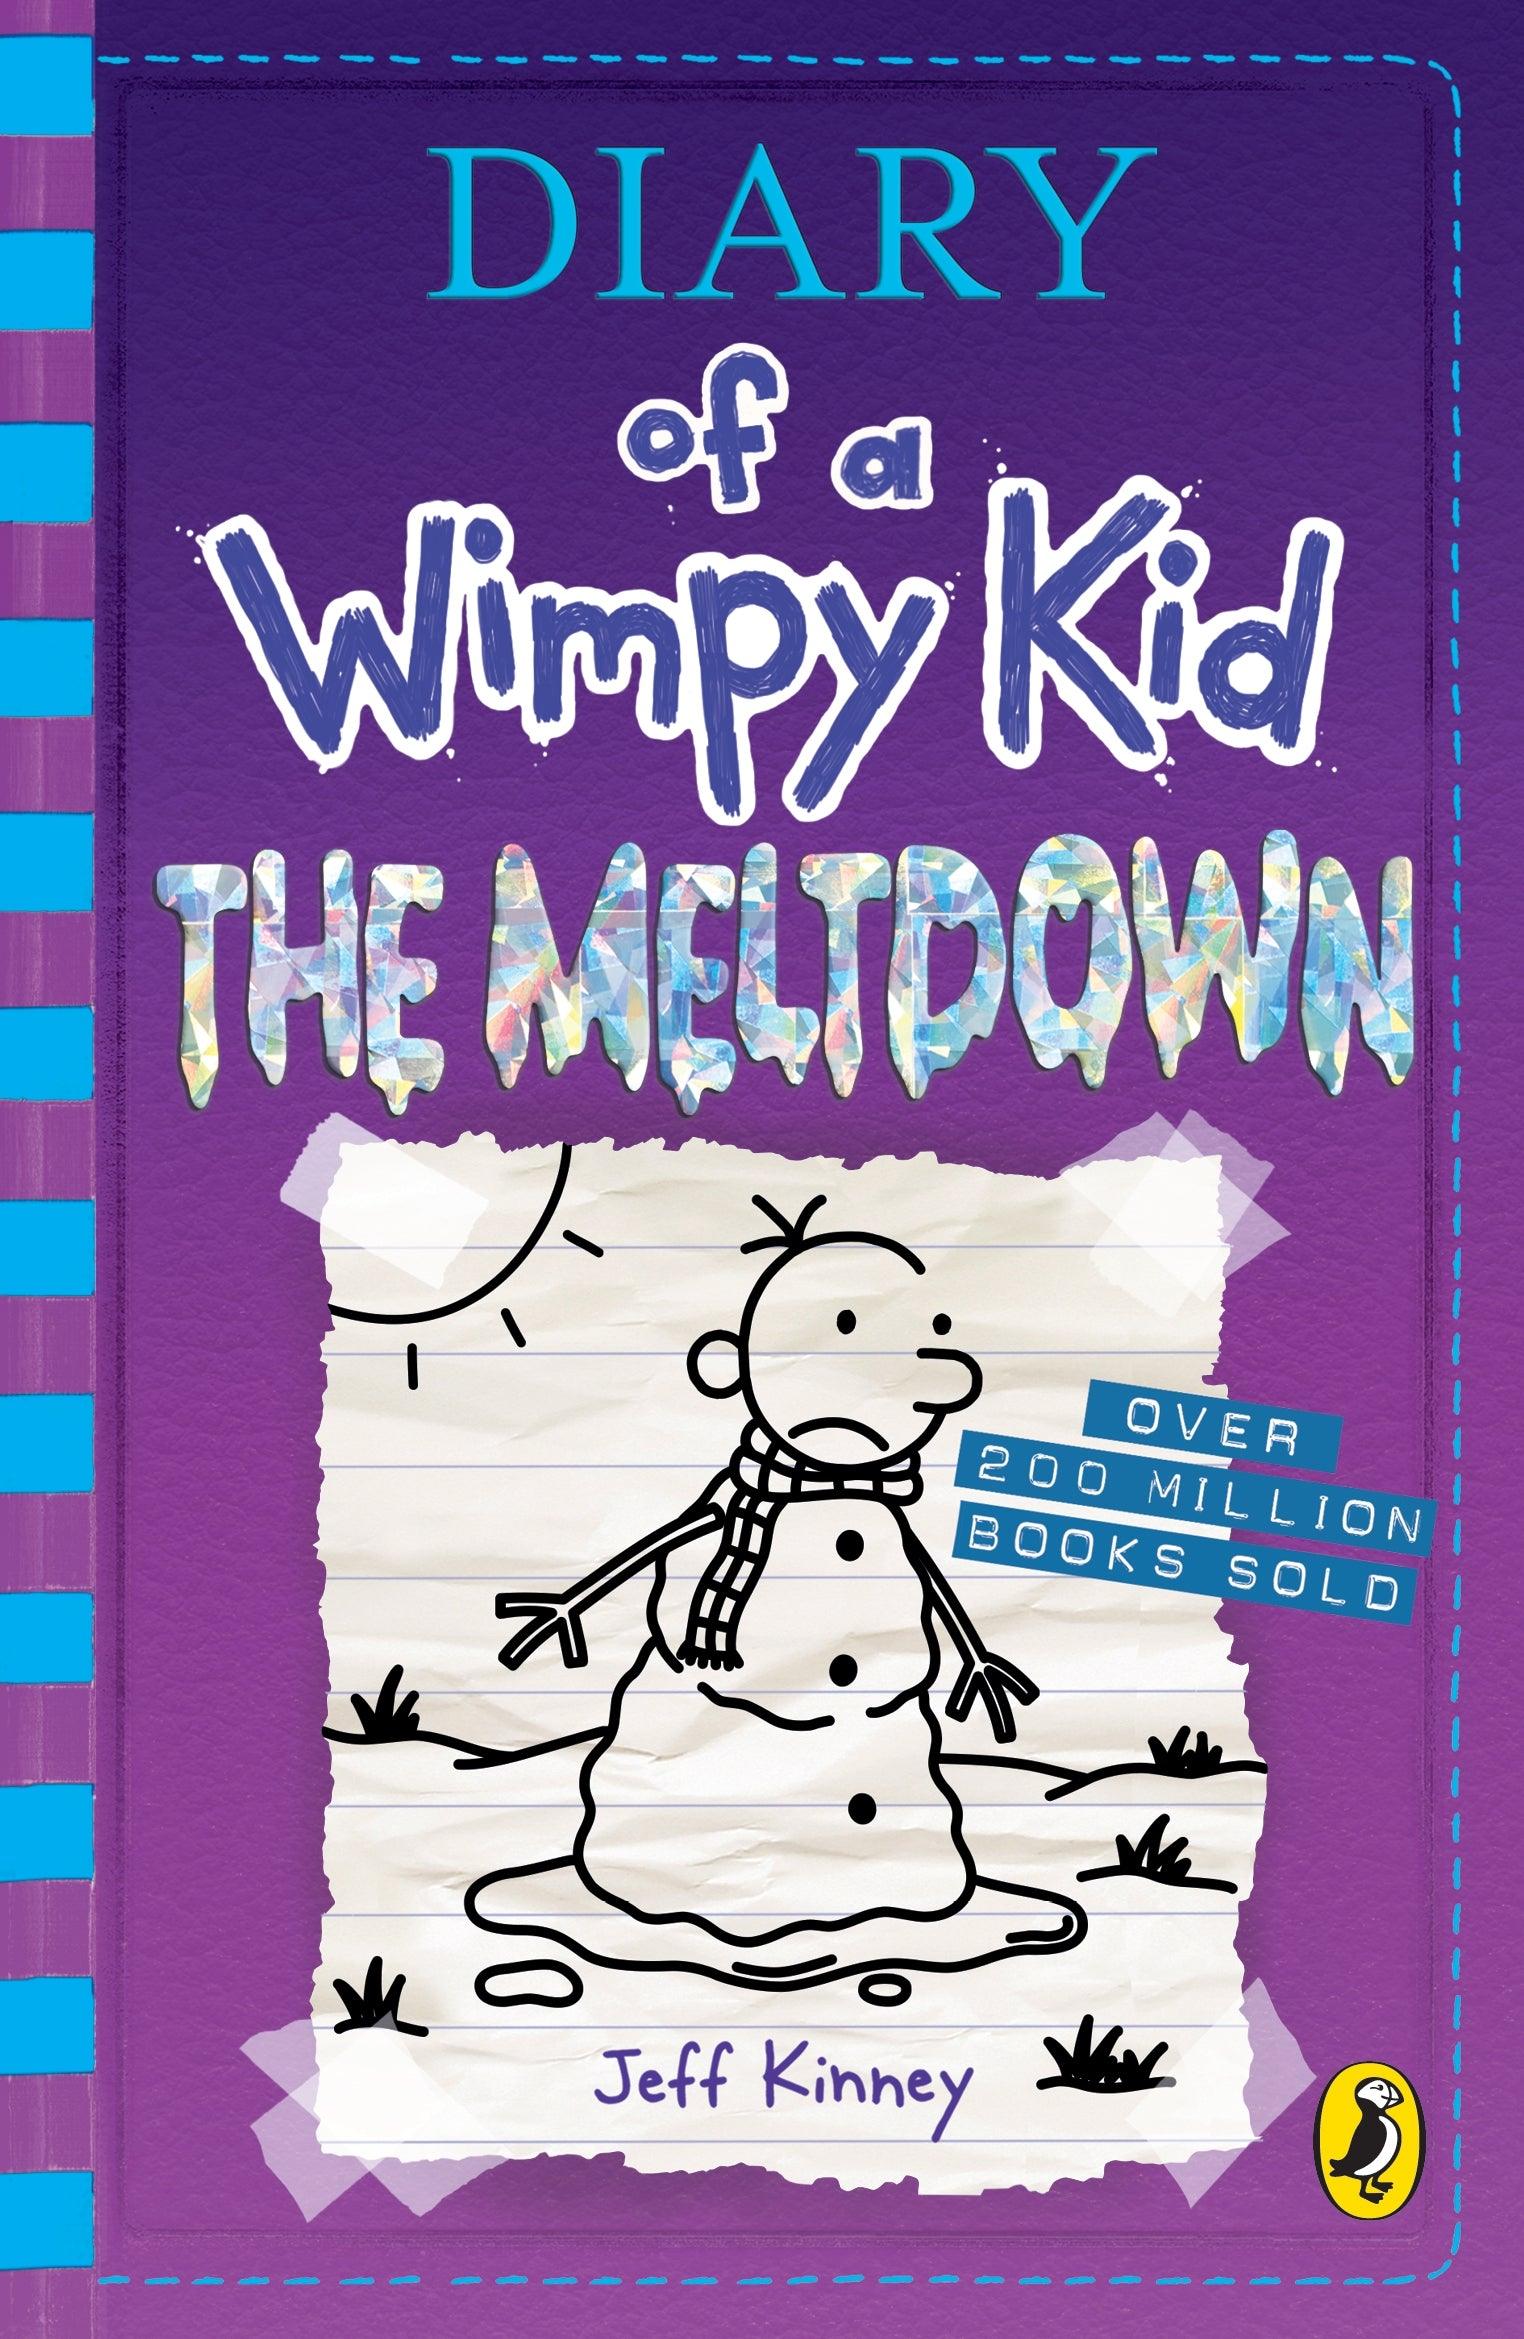 Diary of a Wimpy Kid #13 - THE MELTDOWN - Spectrawide Bookstore